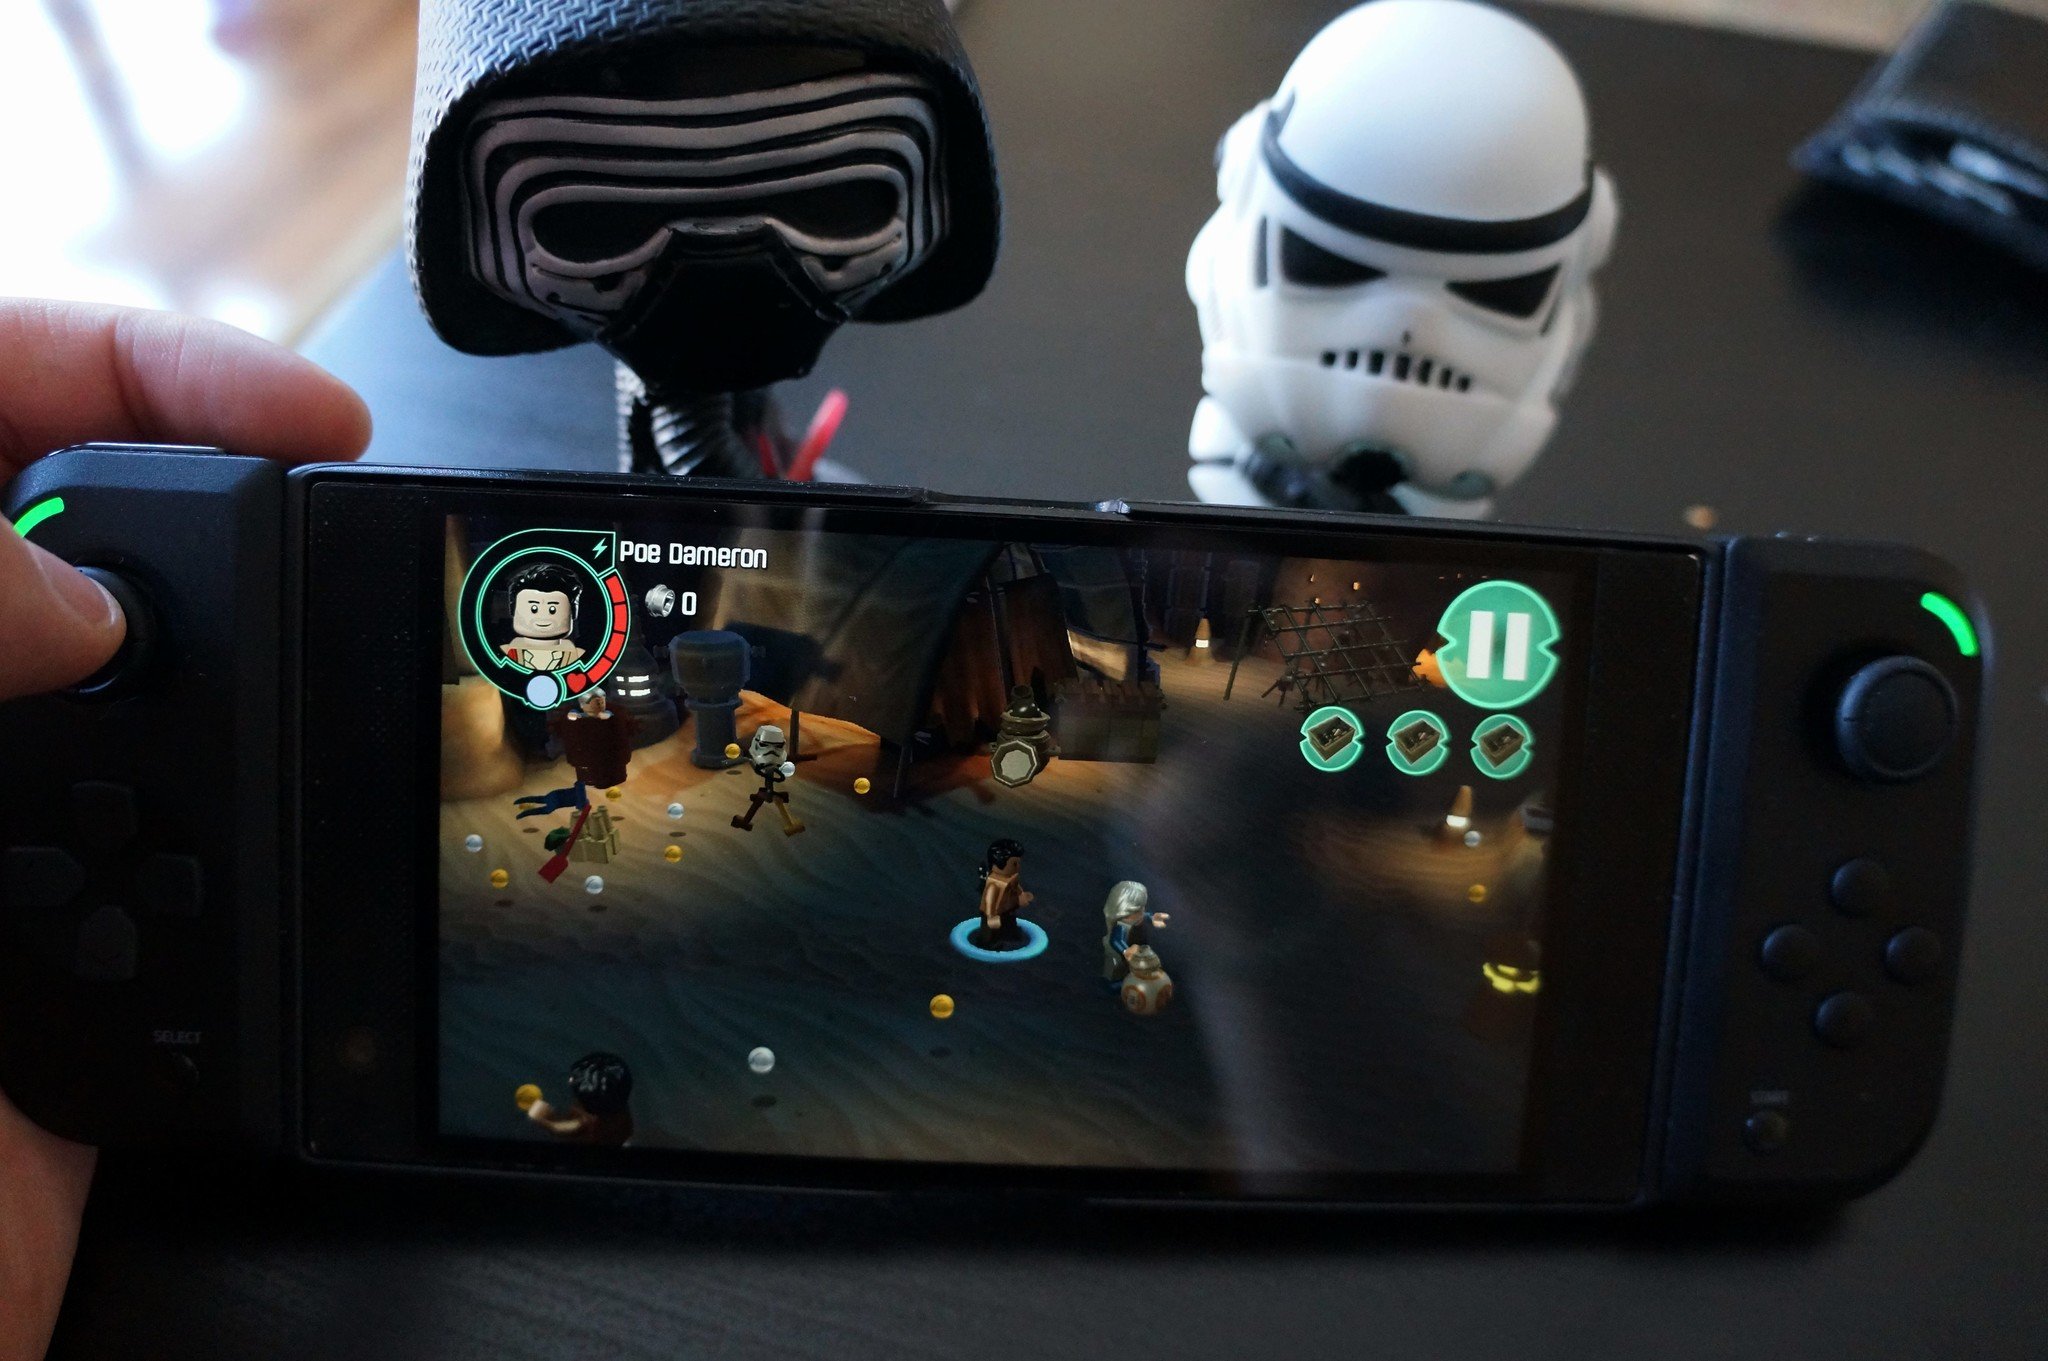 lego star wars android